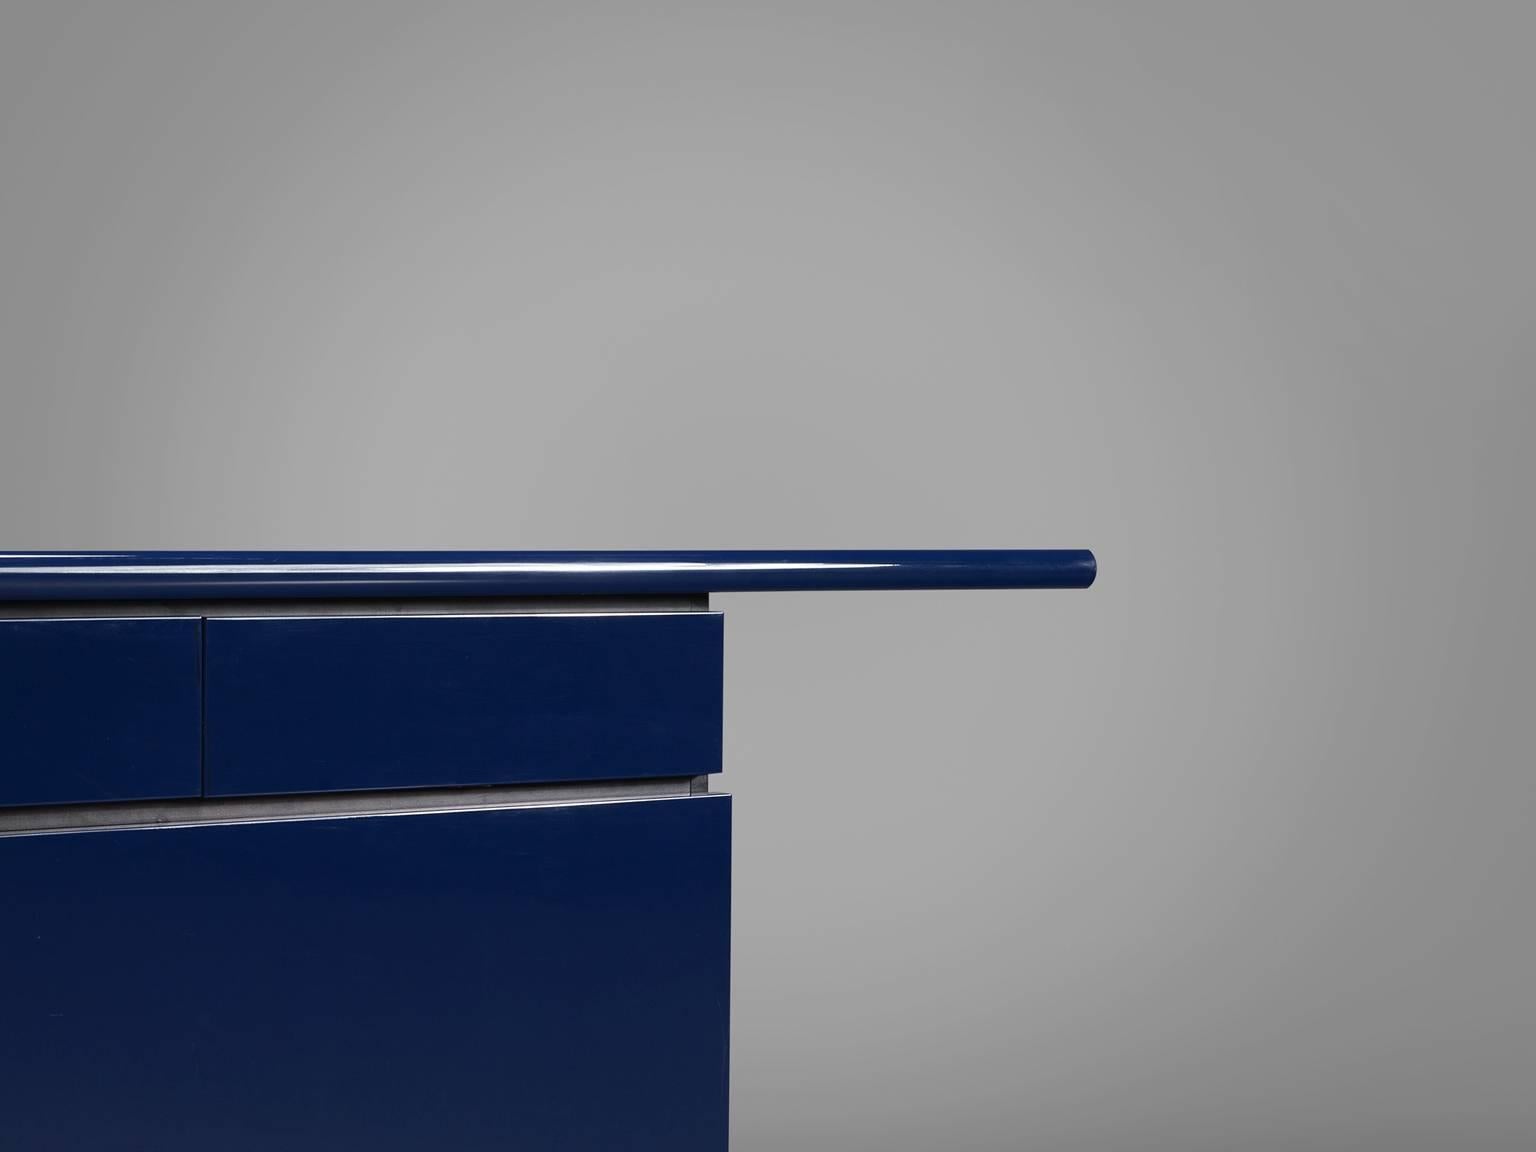 Veneer Giotto Stoppino for Acerbis 'Sheraton' Navy Blue Sideboard, 1979